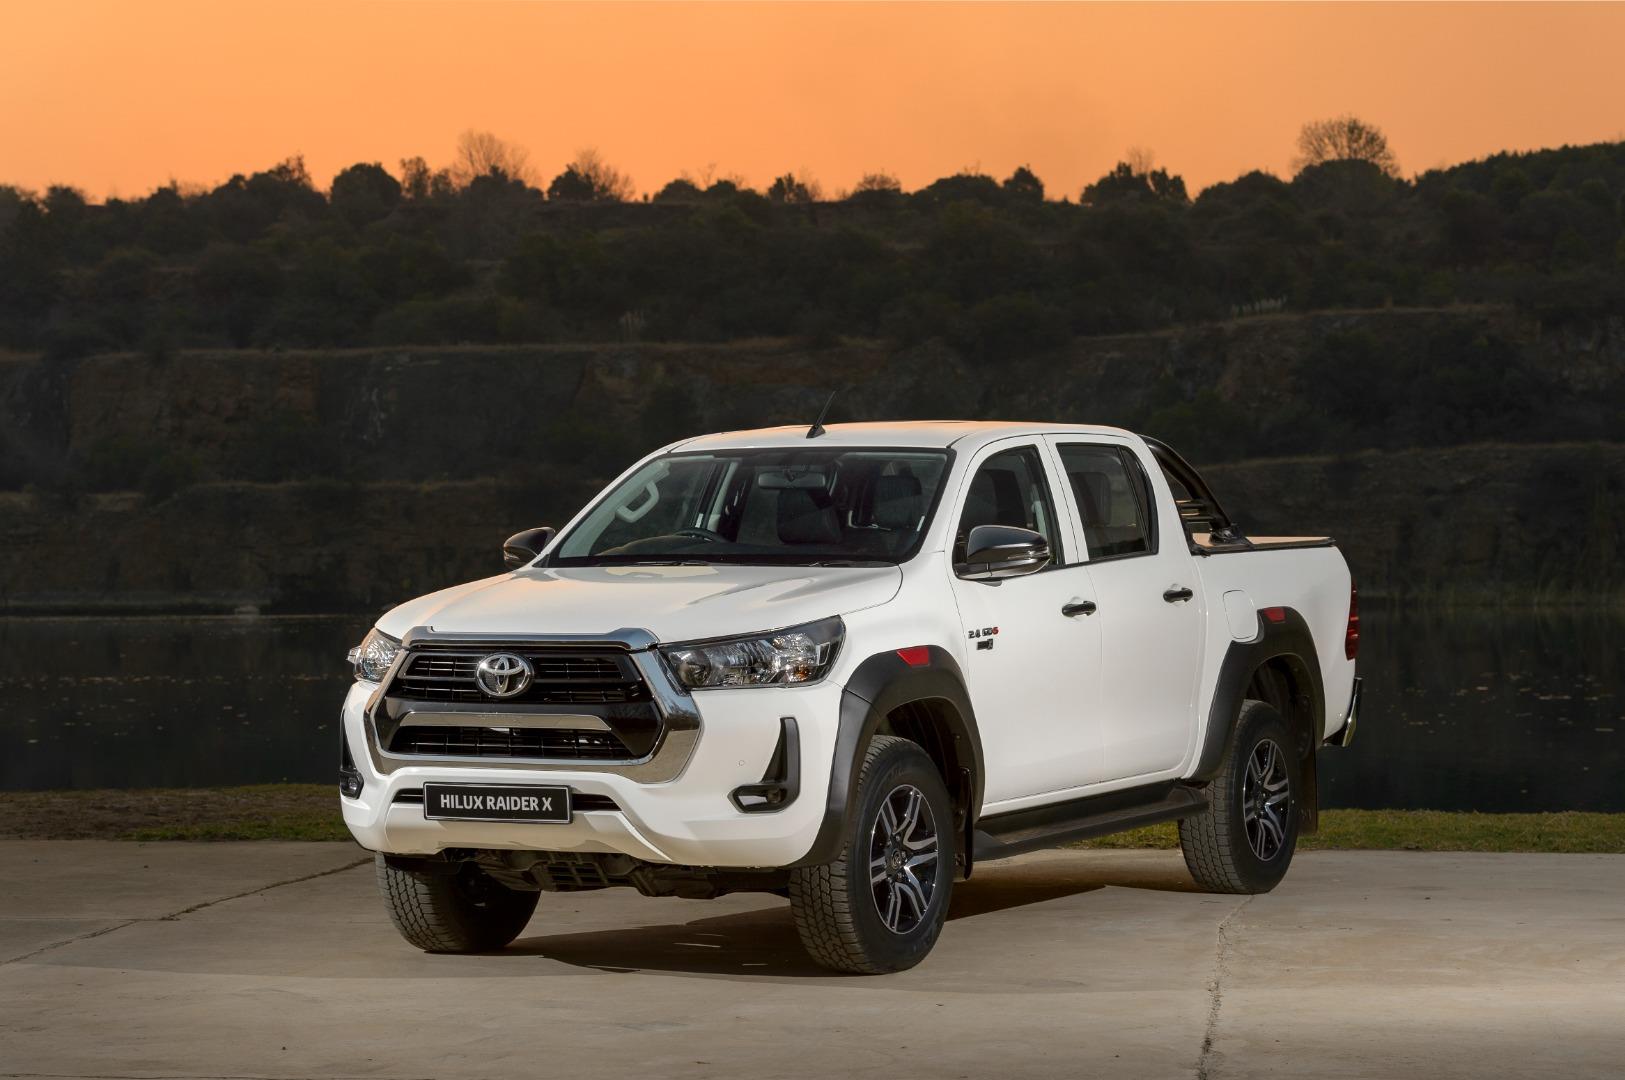 toyota hilux vs ford ranger vs isuzu d-max: which one has the lowest running costs?